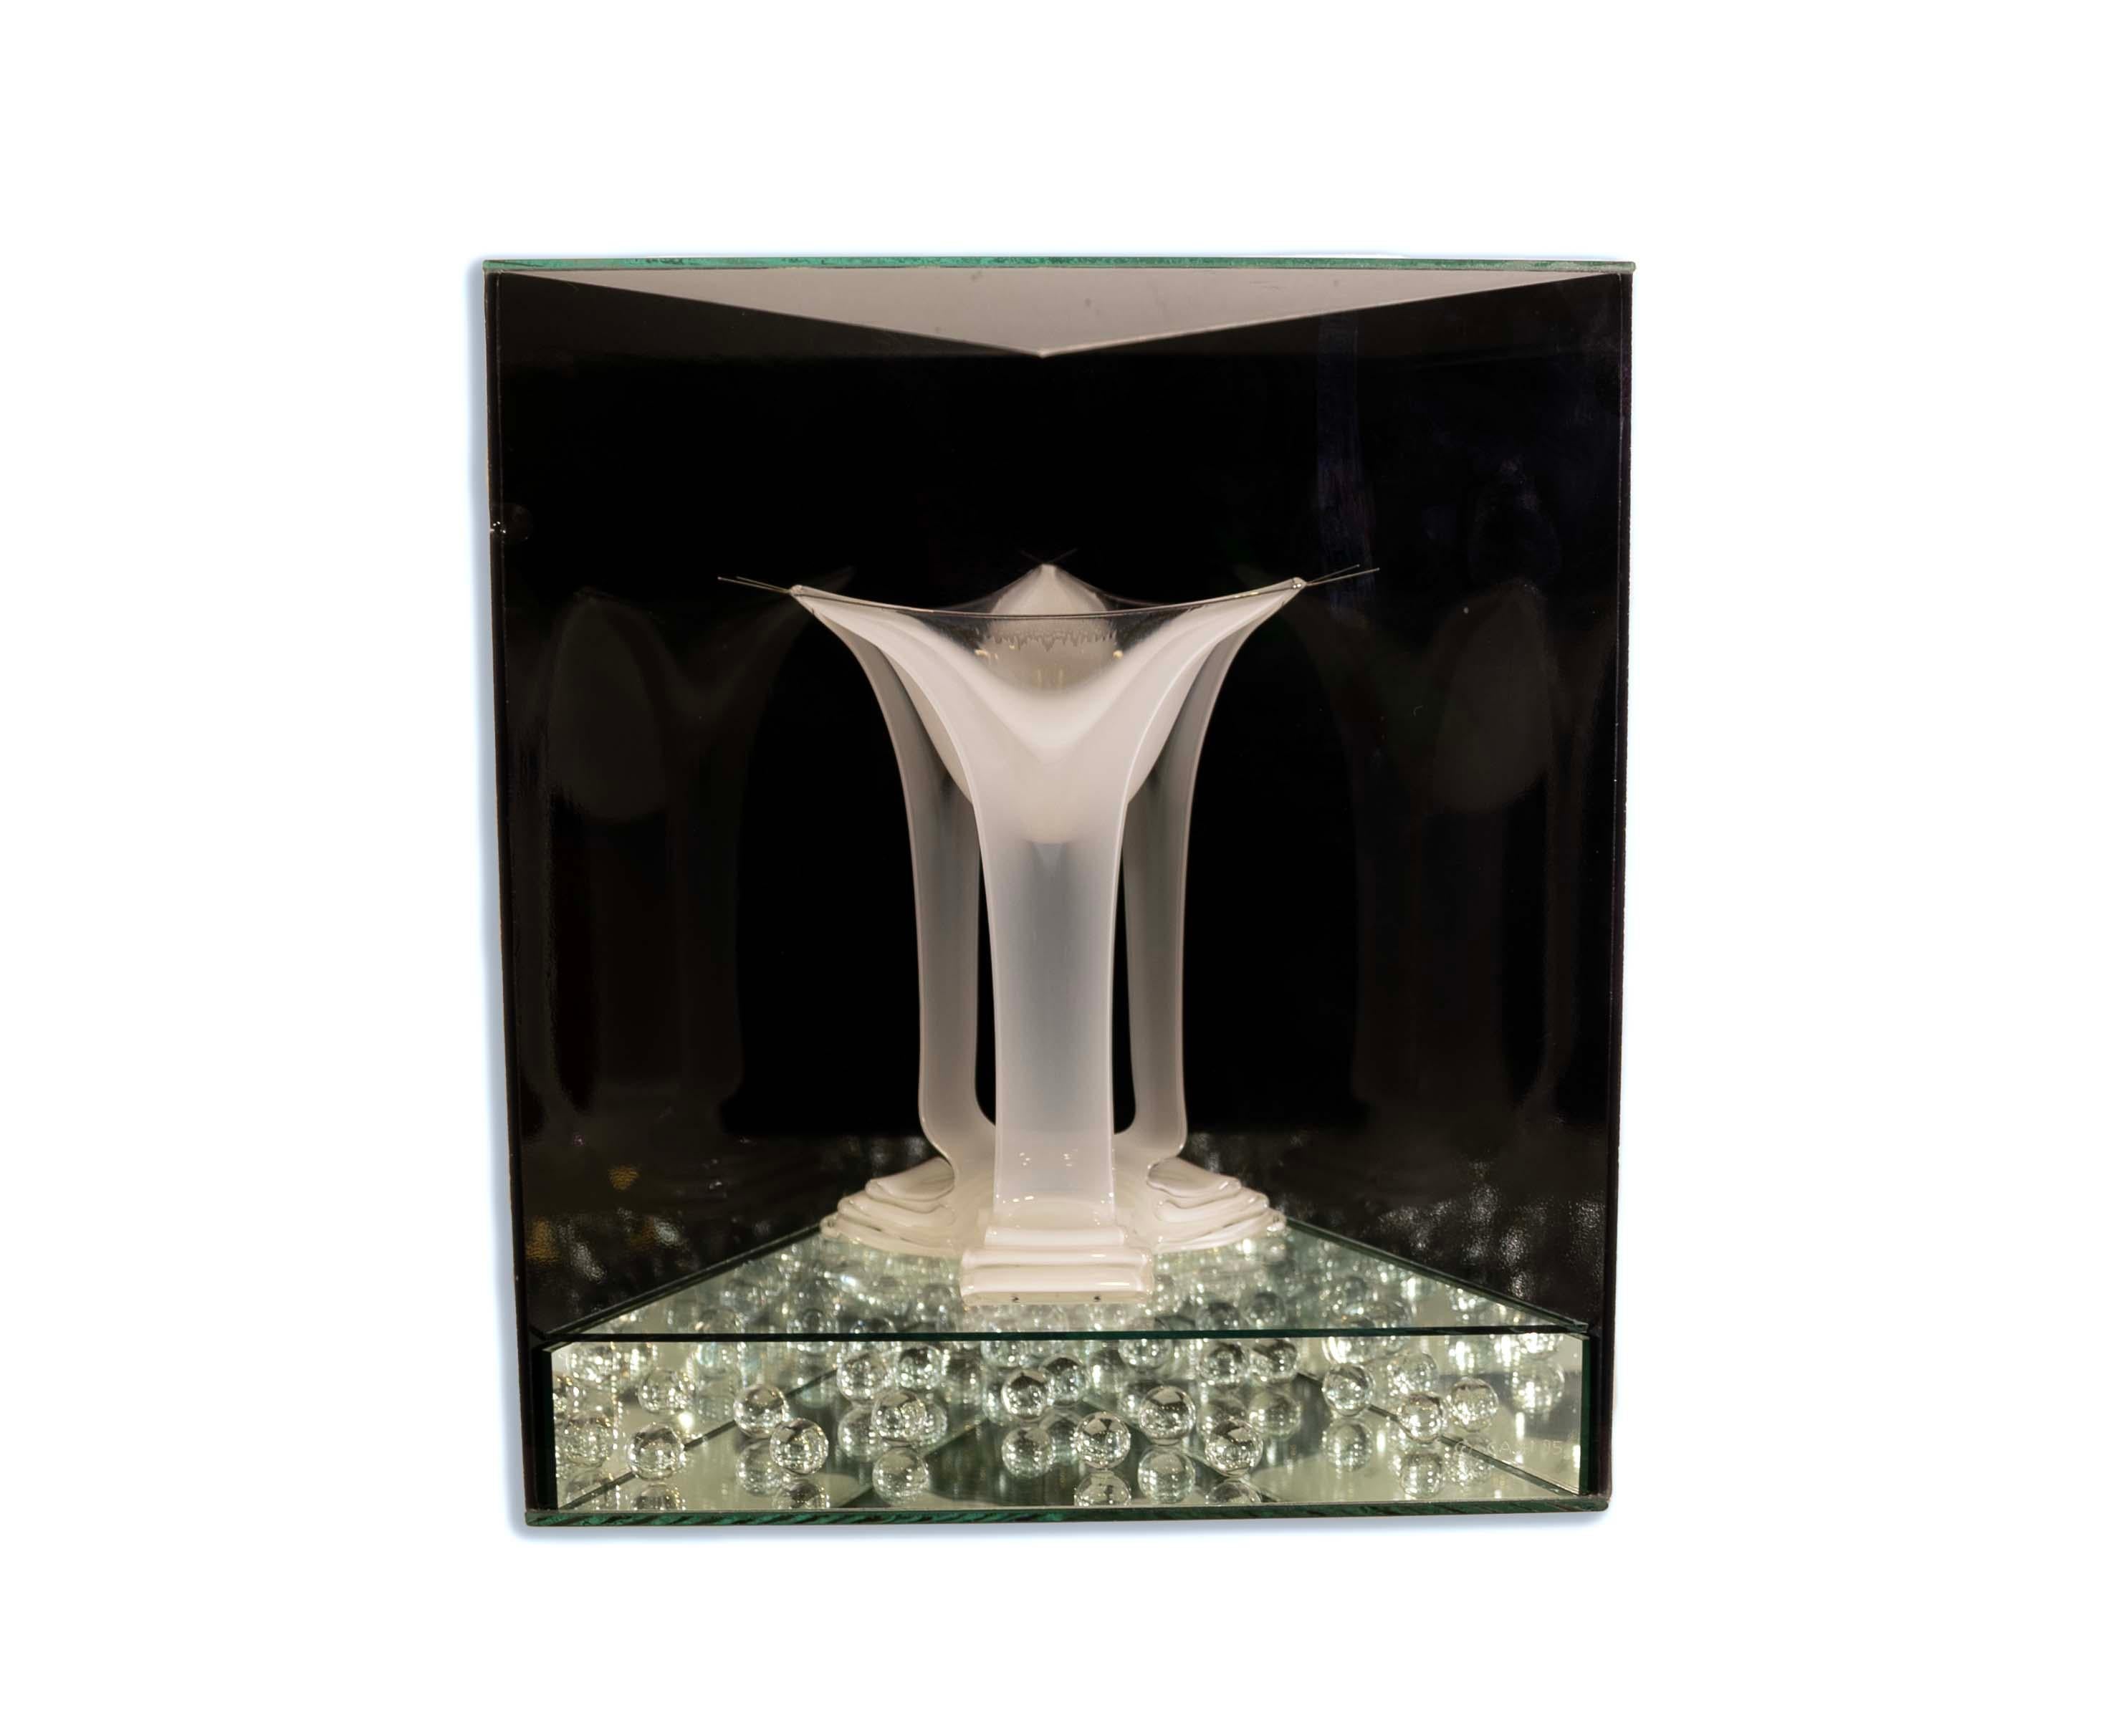 A contemporary glass sculpture titled 